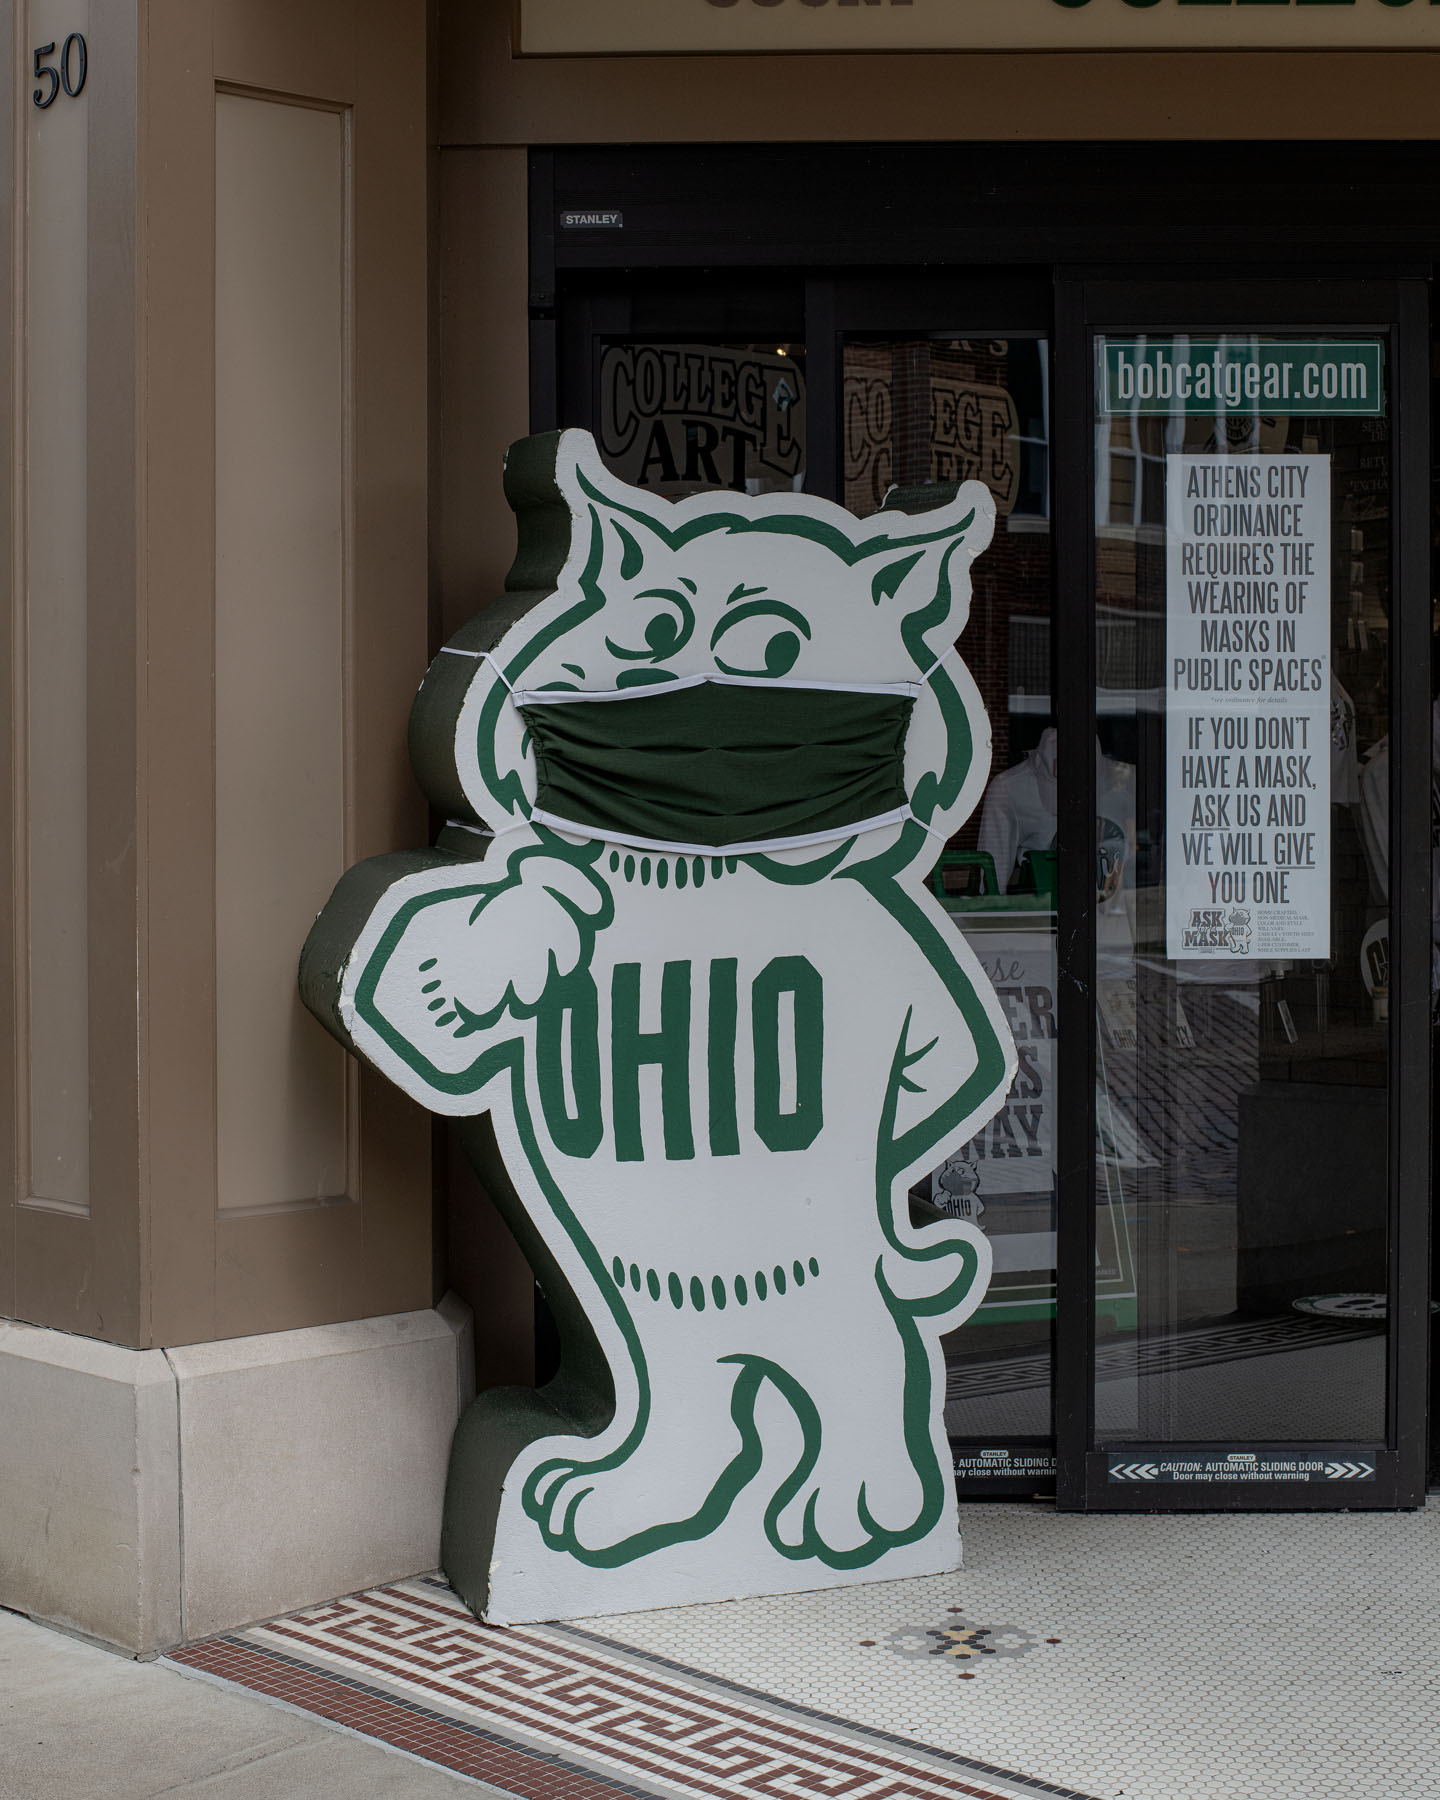 A cardboard cutout of the classic Rufus mascot stands outside a book store with a green cloth mask applied over it